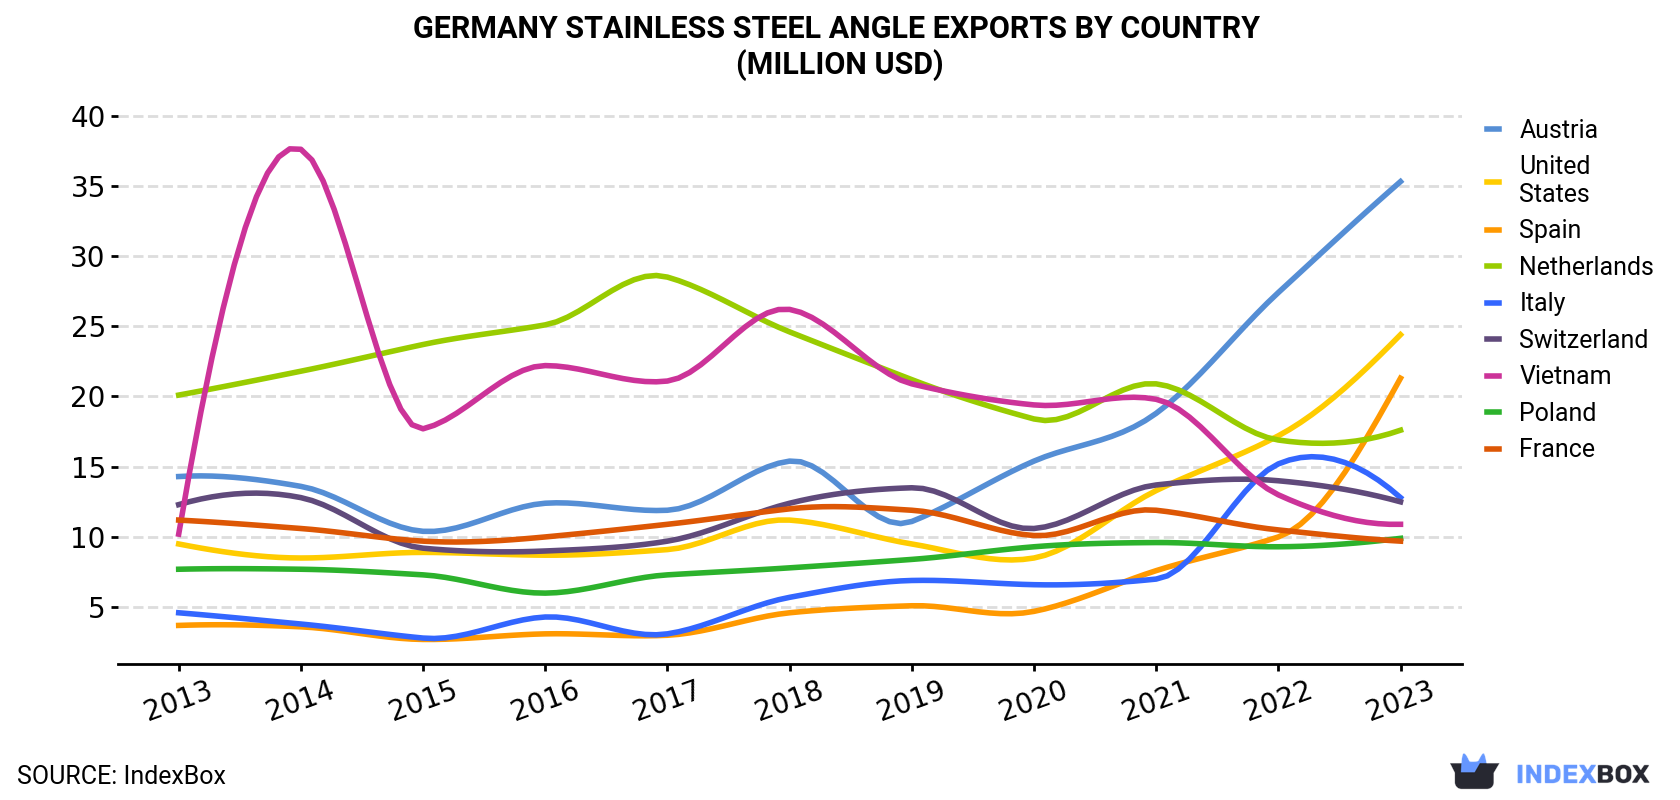 Germany Stainless Steel Angle Exports By Country (Million USD)